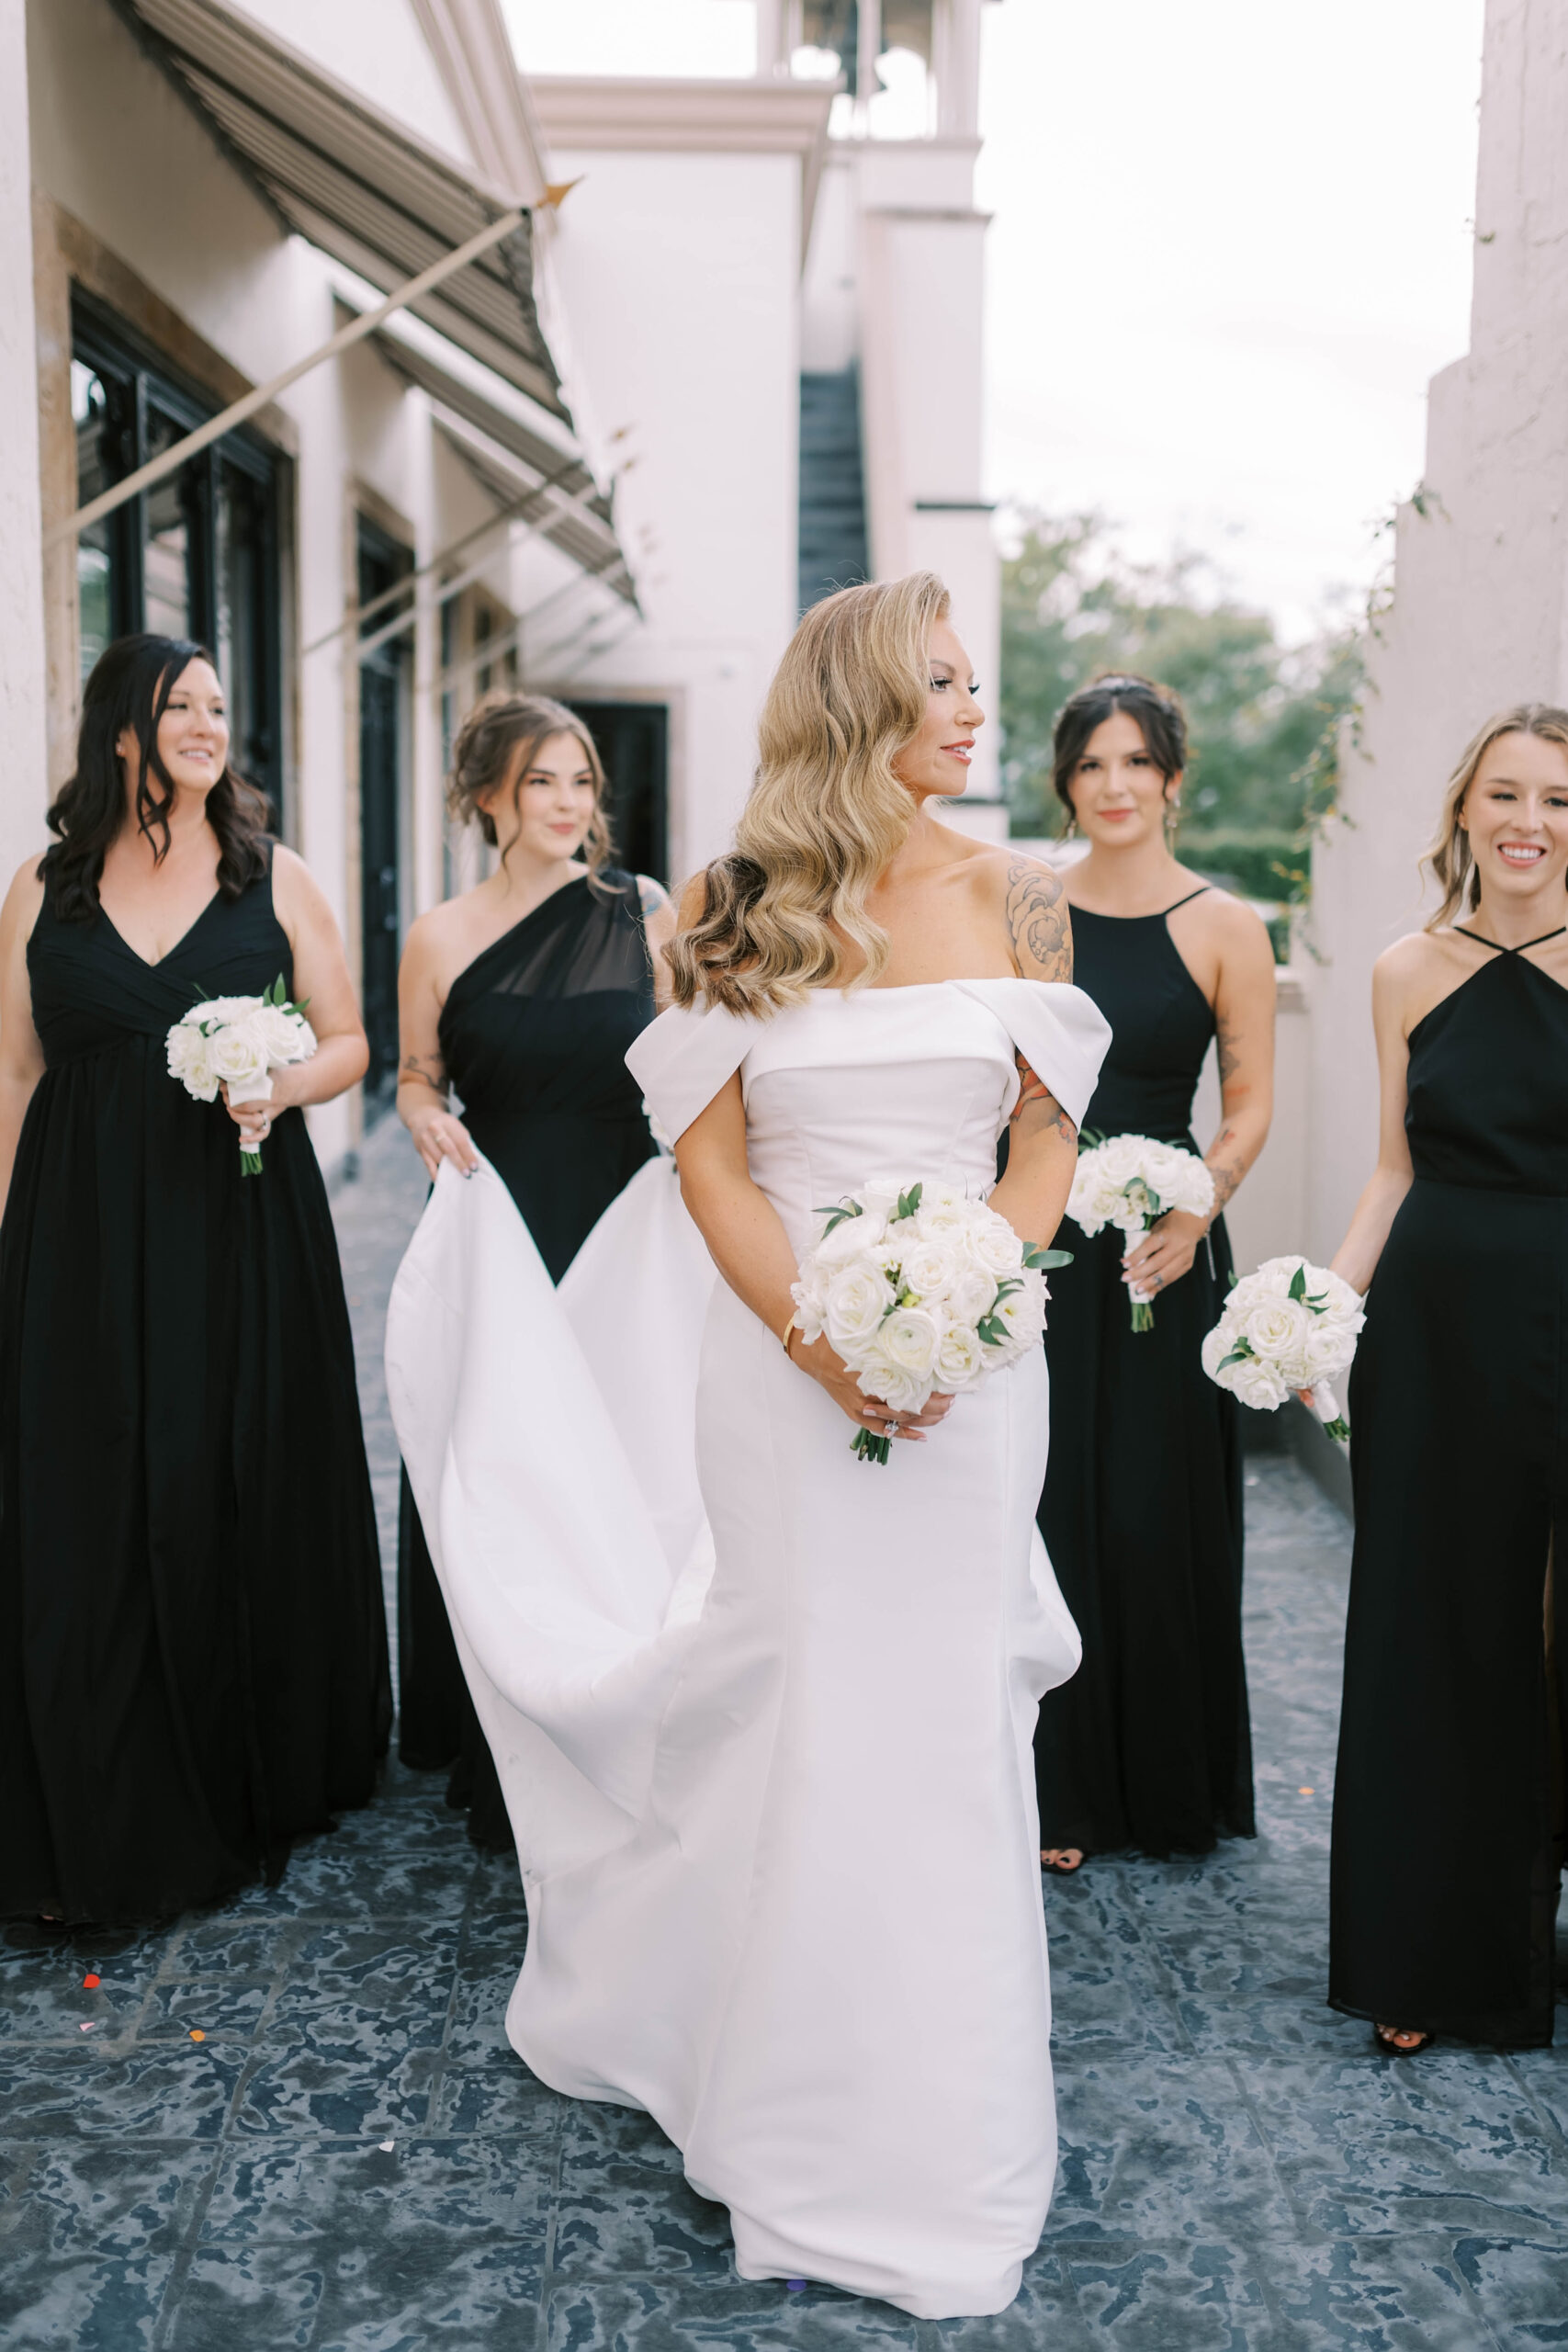 A classic and elegant black tie wedding in Houston at The Bell Tower on 34th